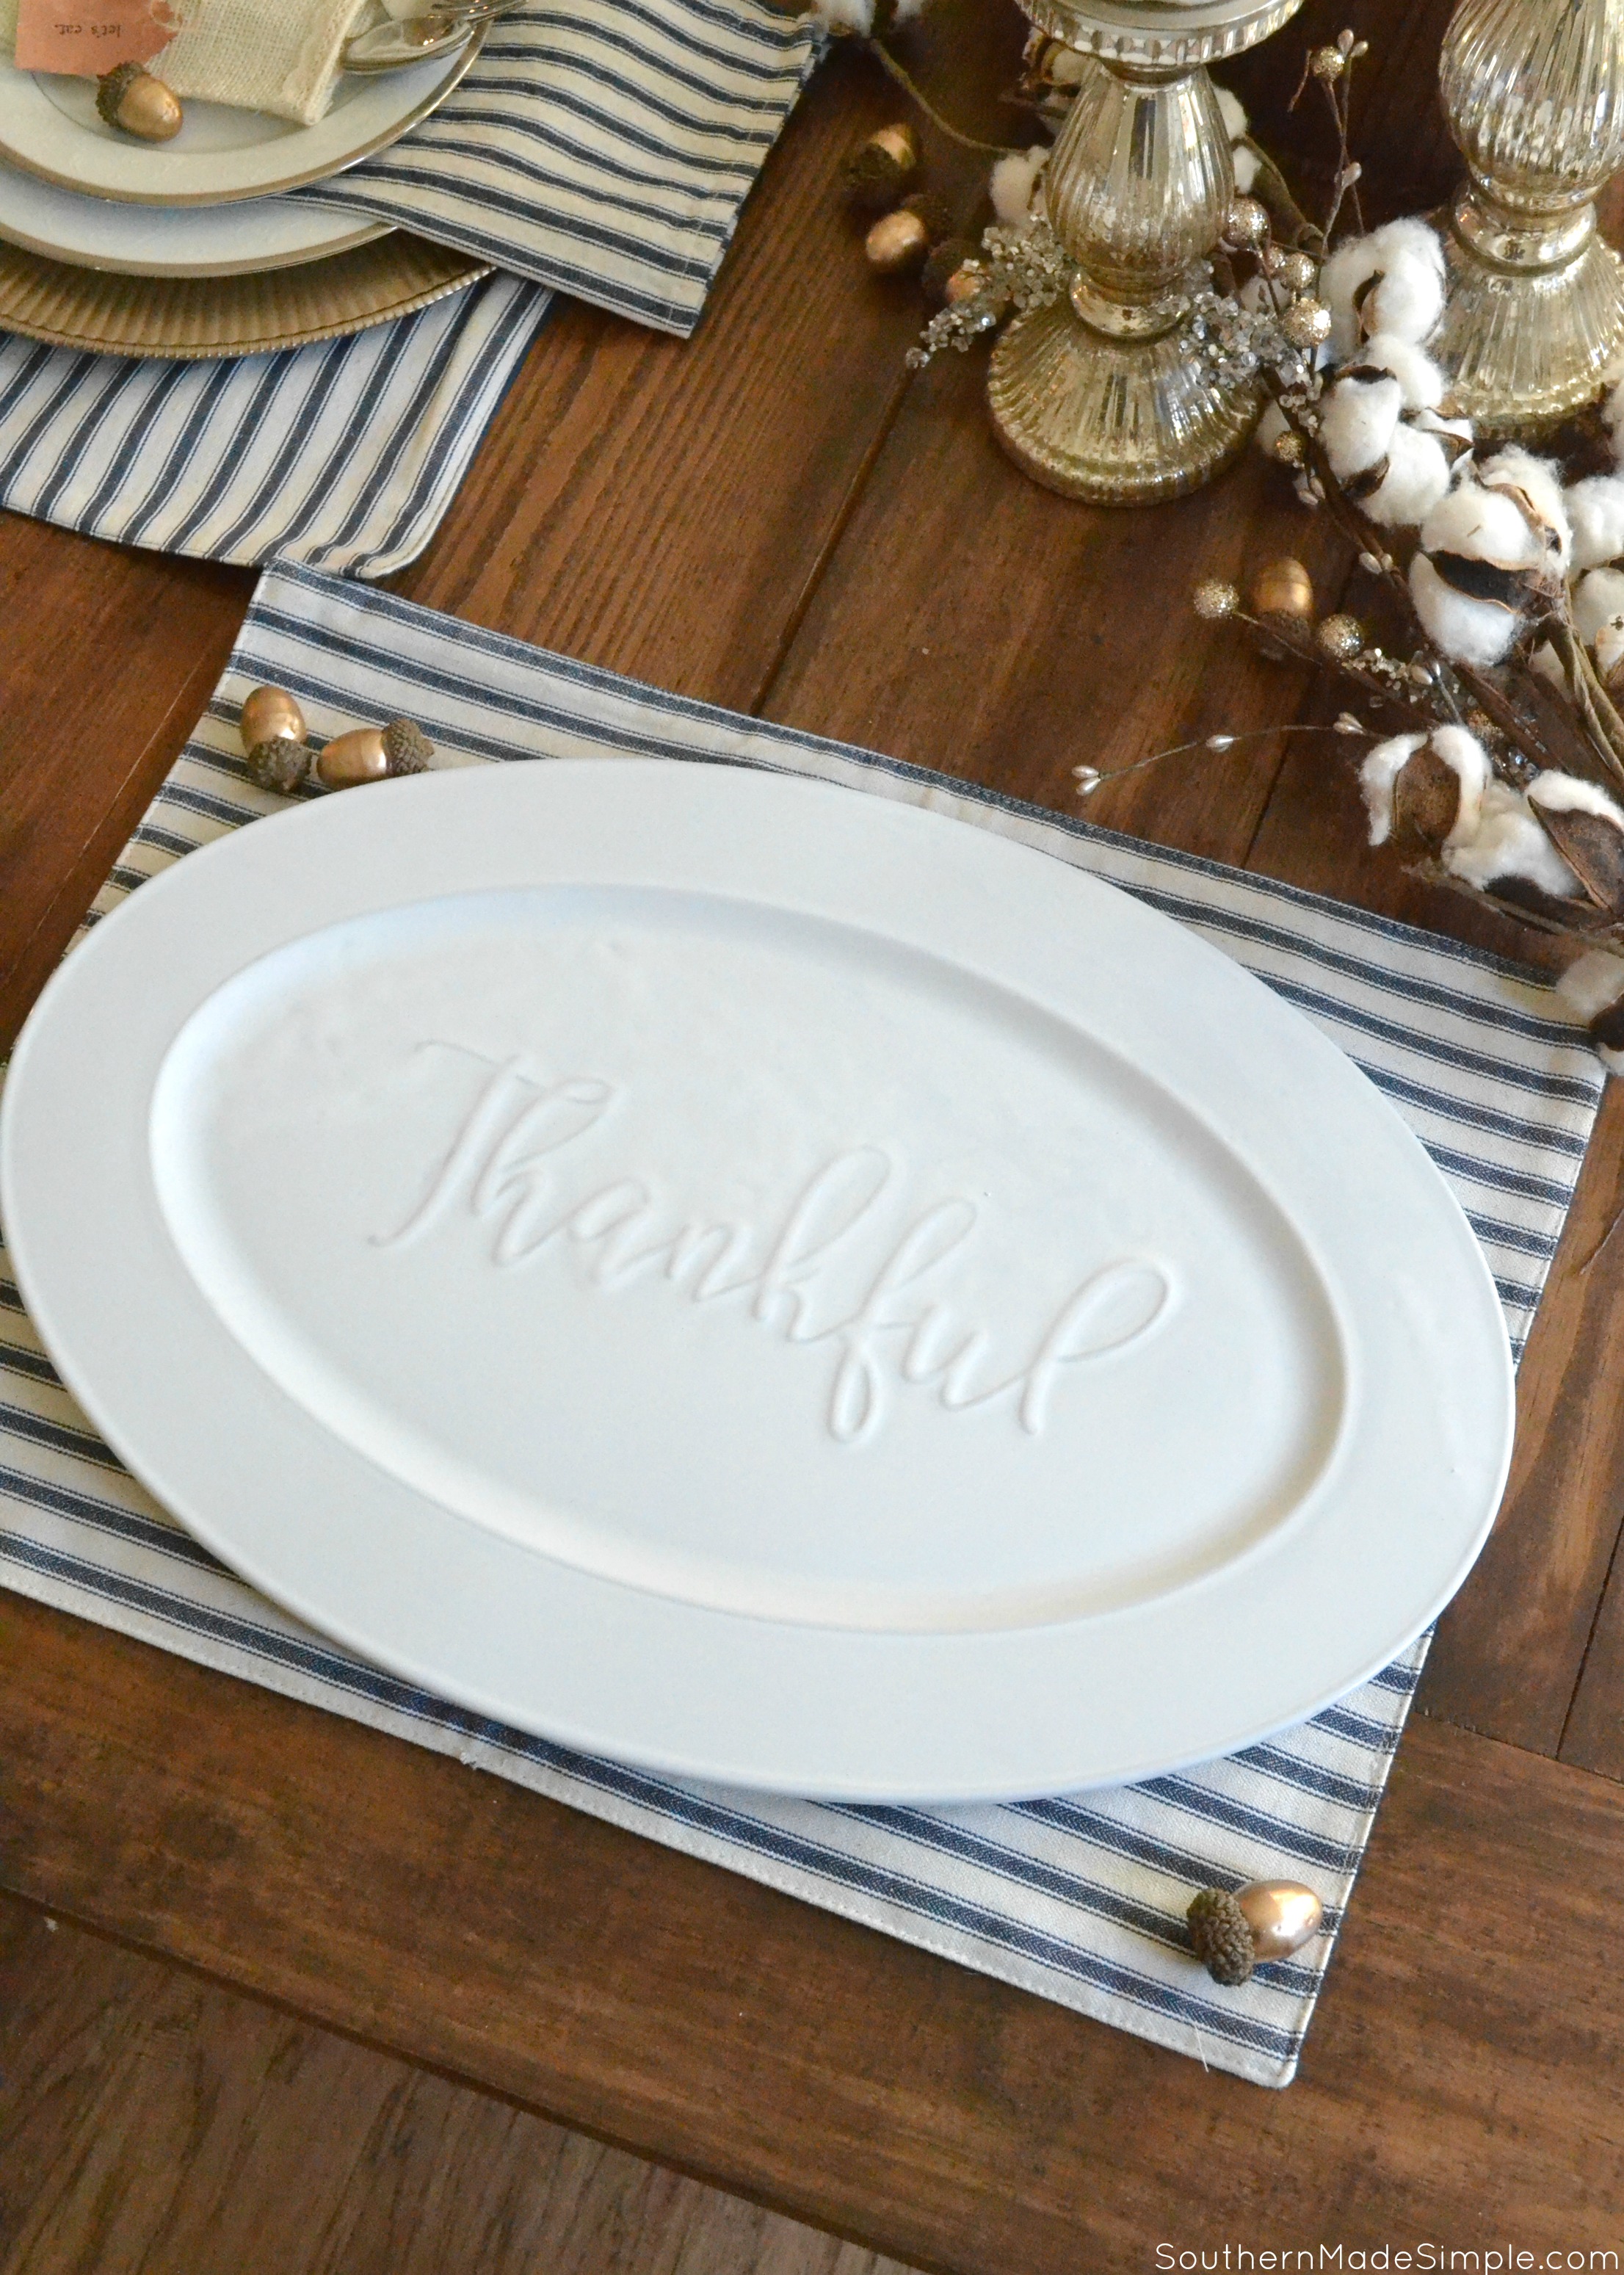 My Top Thanksgiving Hostess Gift Pick: Precious Moments Bountiful Blessings Collection